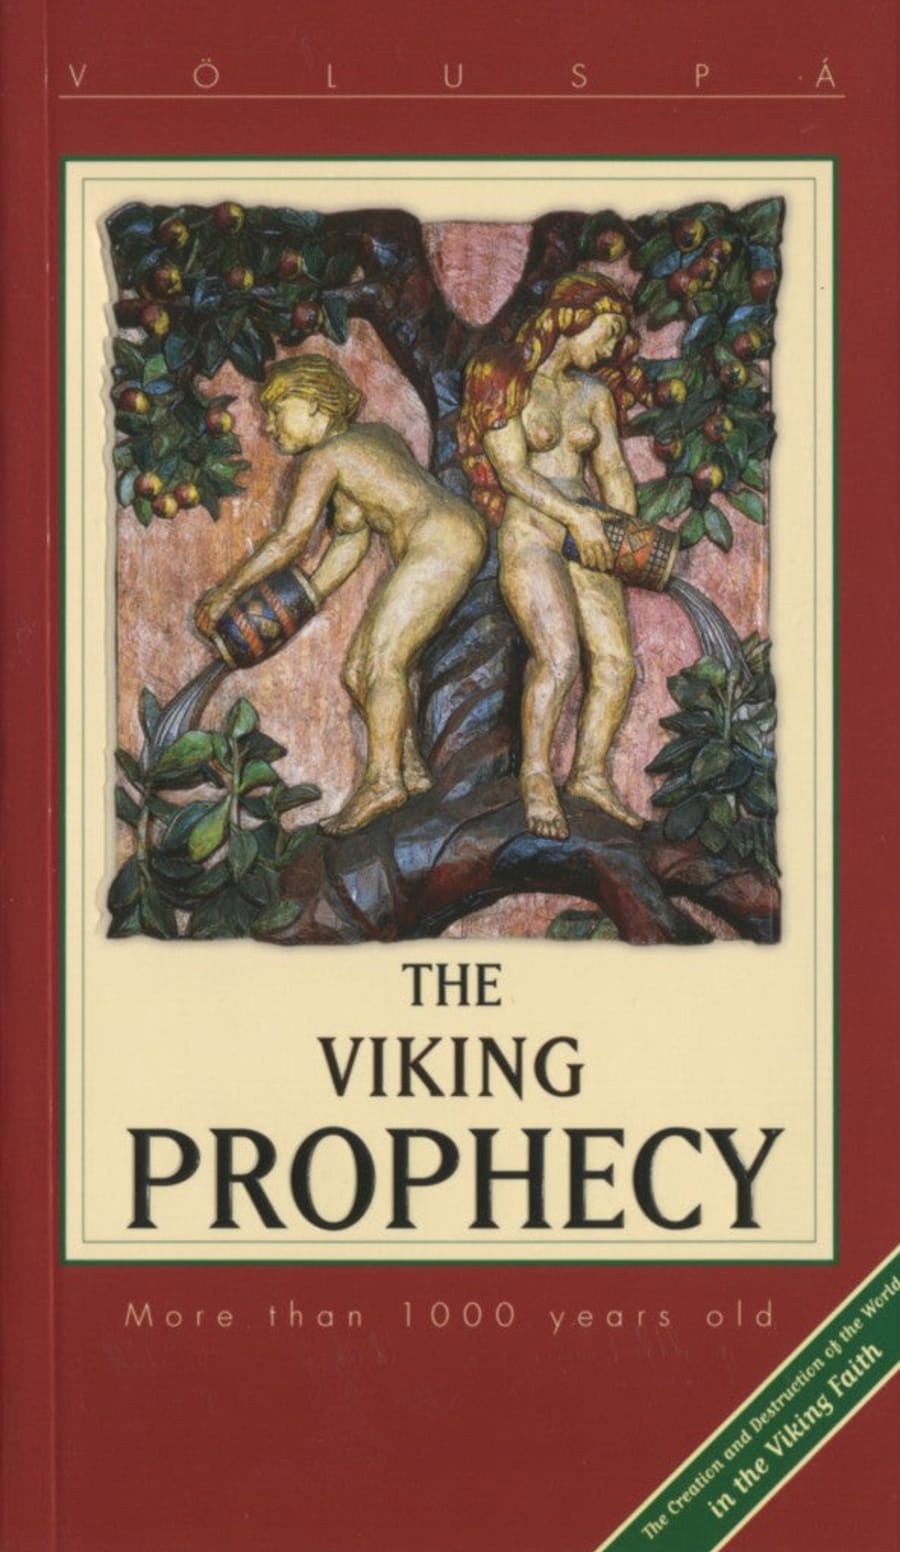 The Viking Prophecy